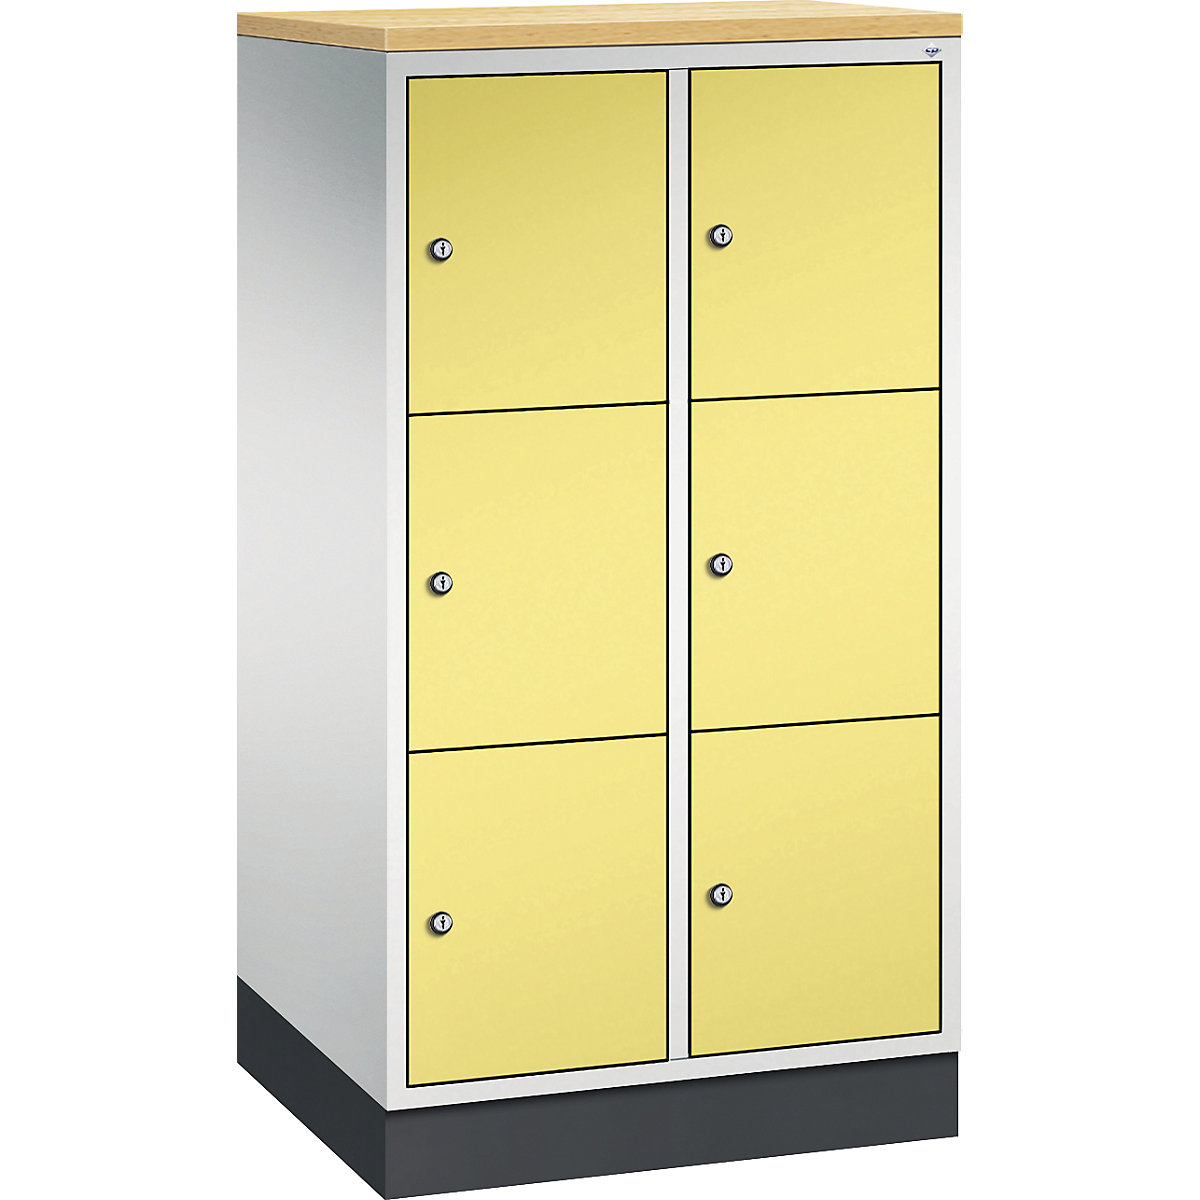 INTRO steel compartment locker, compartment height 345 mm – C+P, WxD 620 x 500 mm, 6 compartments, light grey body, sulphur yellow doors